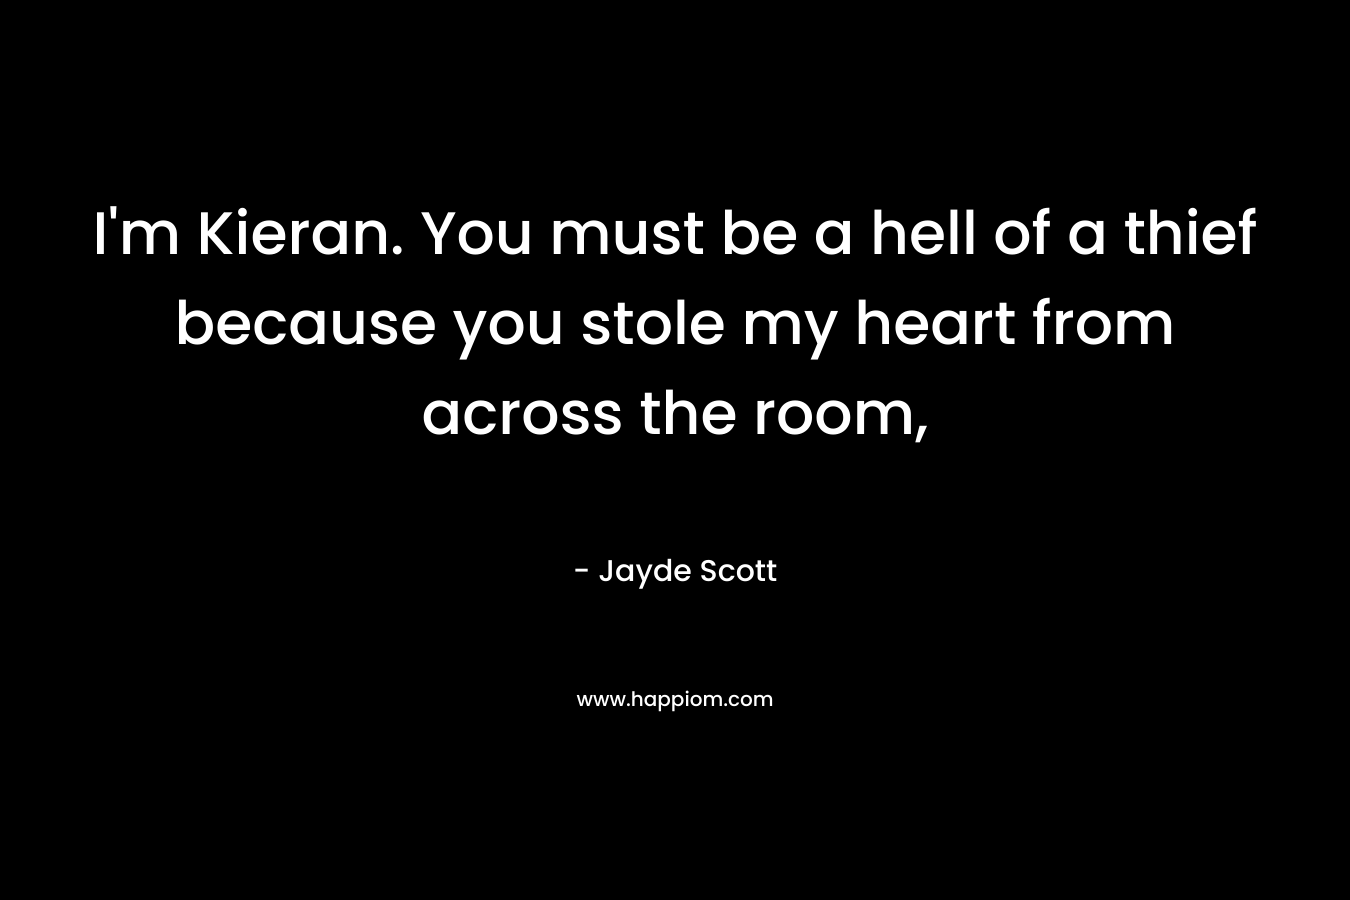 I’m Kieran. You must be a hell of a thief because you stole my heart from across the room, – Jayde Scott